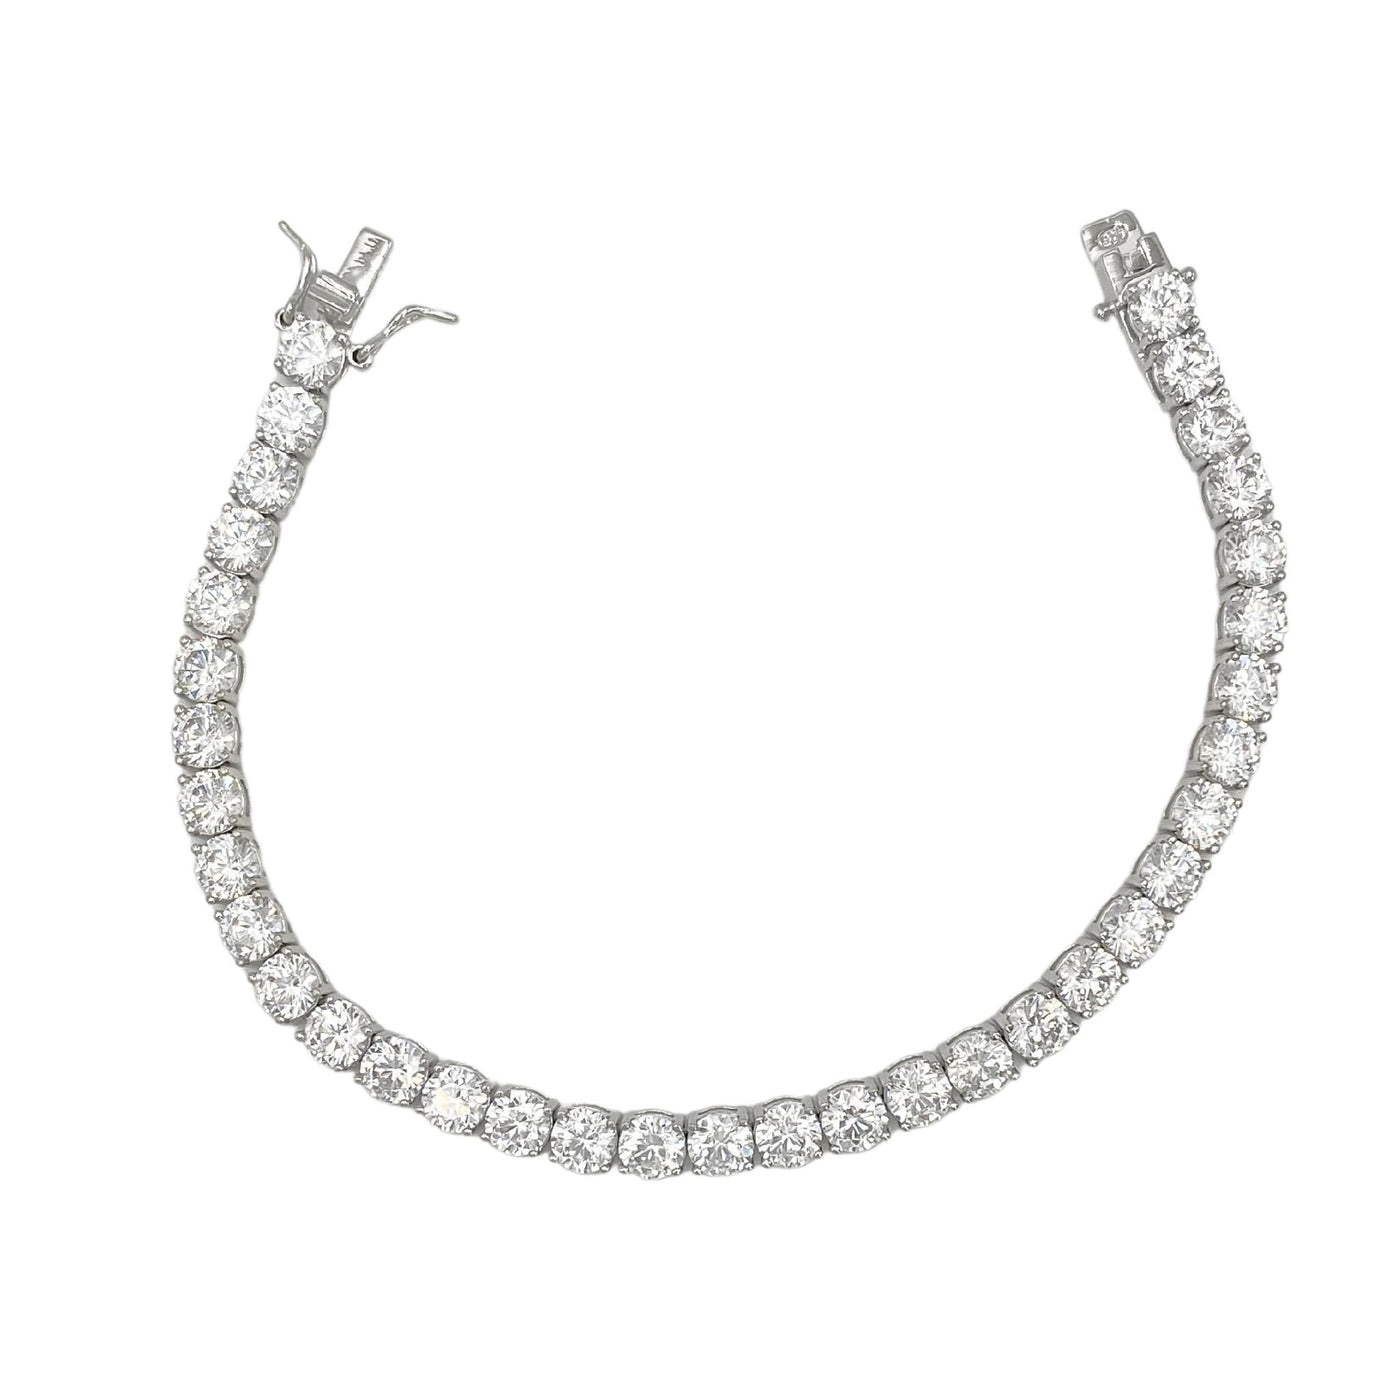 Silver casting tennis bracelet with white round stones - 5 mm